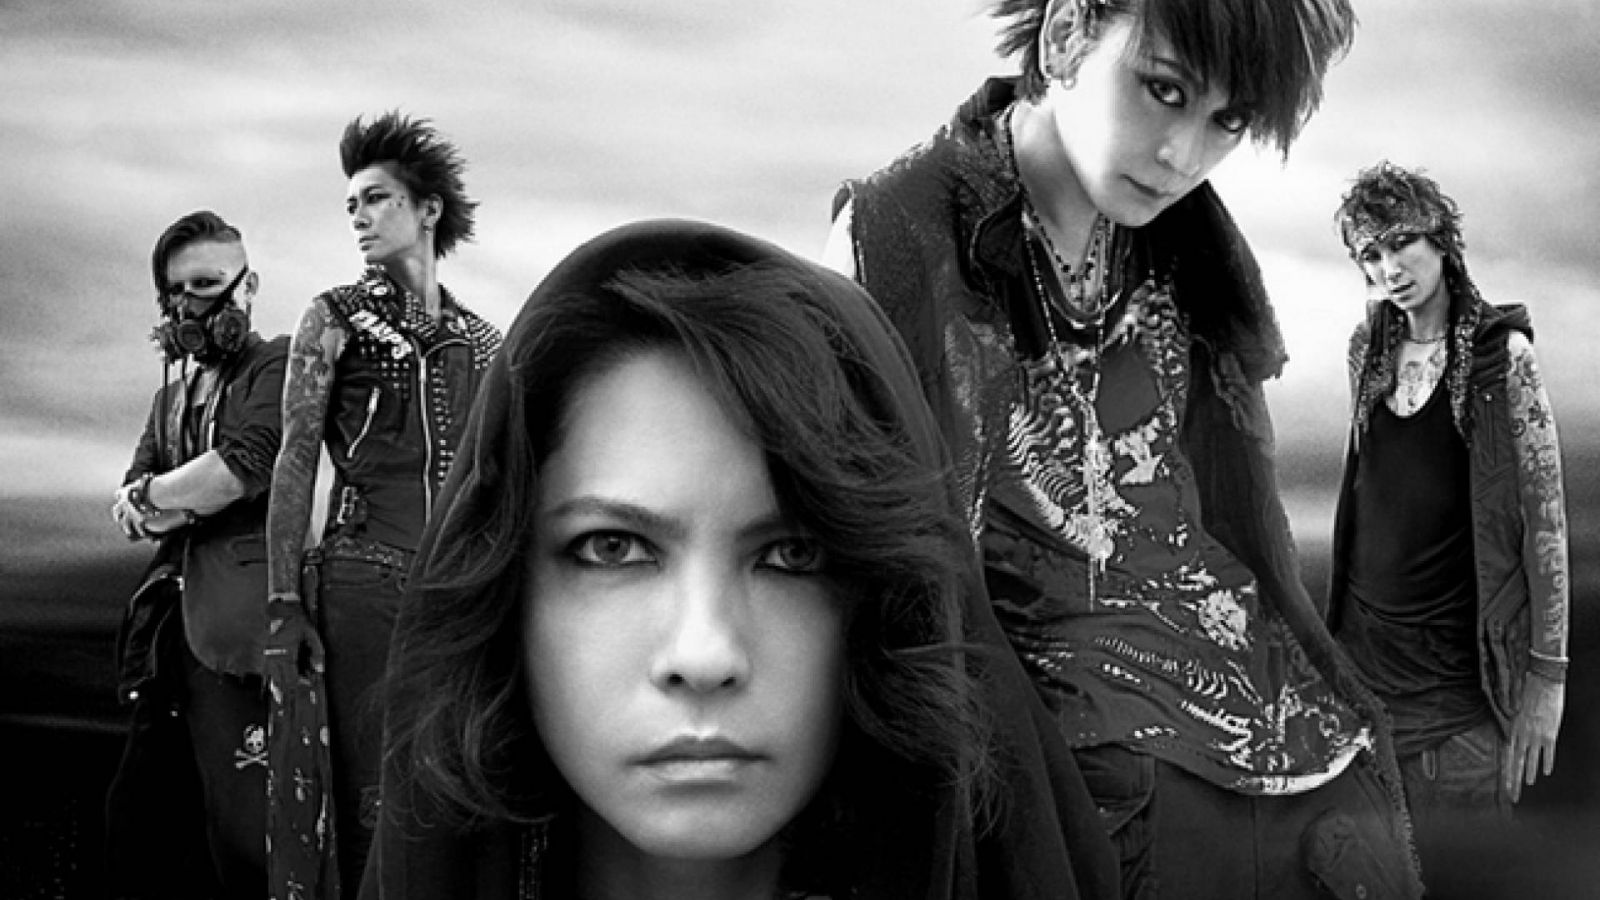 VAMPS and Apocalyptica Collaborate on Single © 2015 VAMPROSE Inc. All rights reserved.